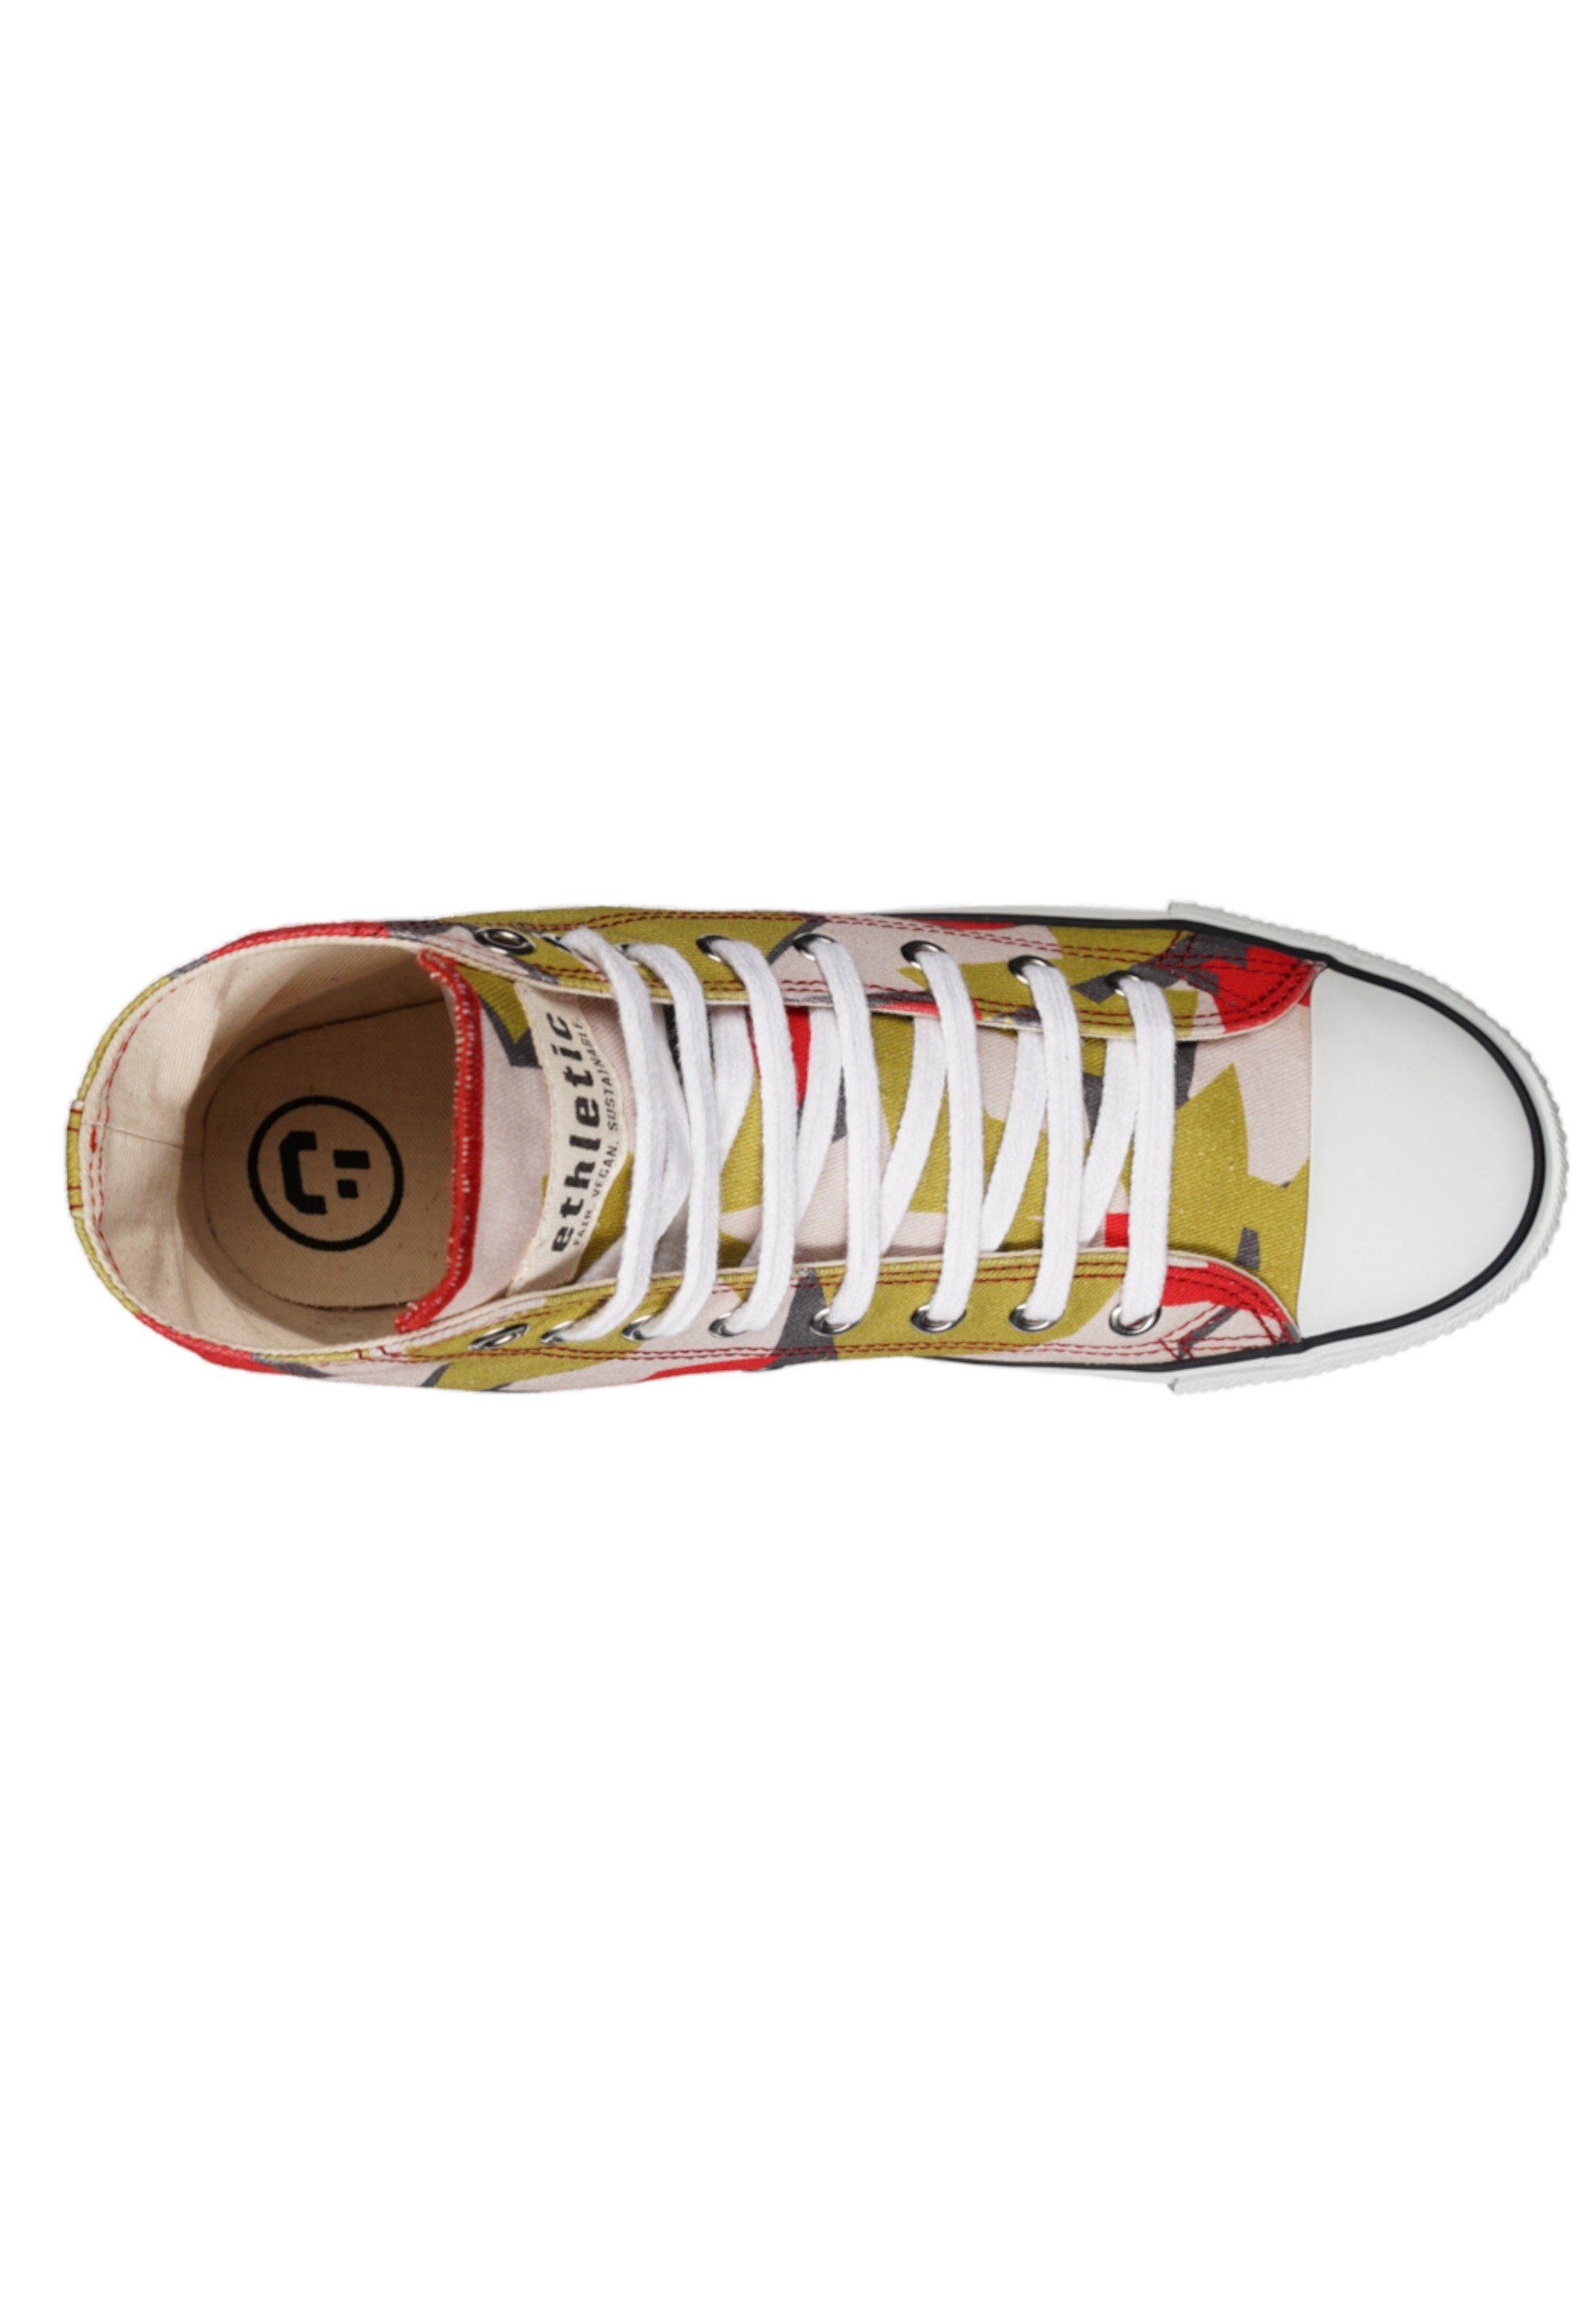 White Cap Hi ETHLETIC Red Sneaker Produkt Just Fairtrade - Camou White Cut